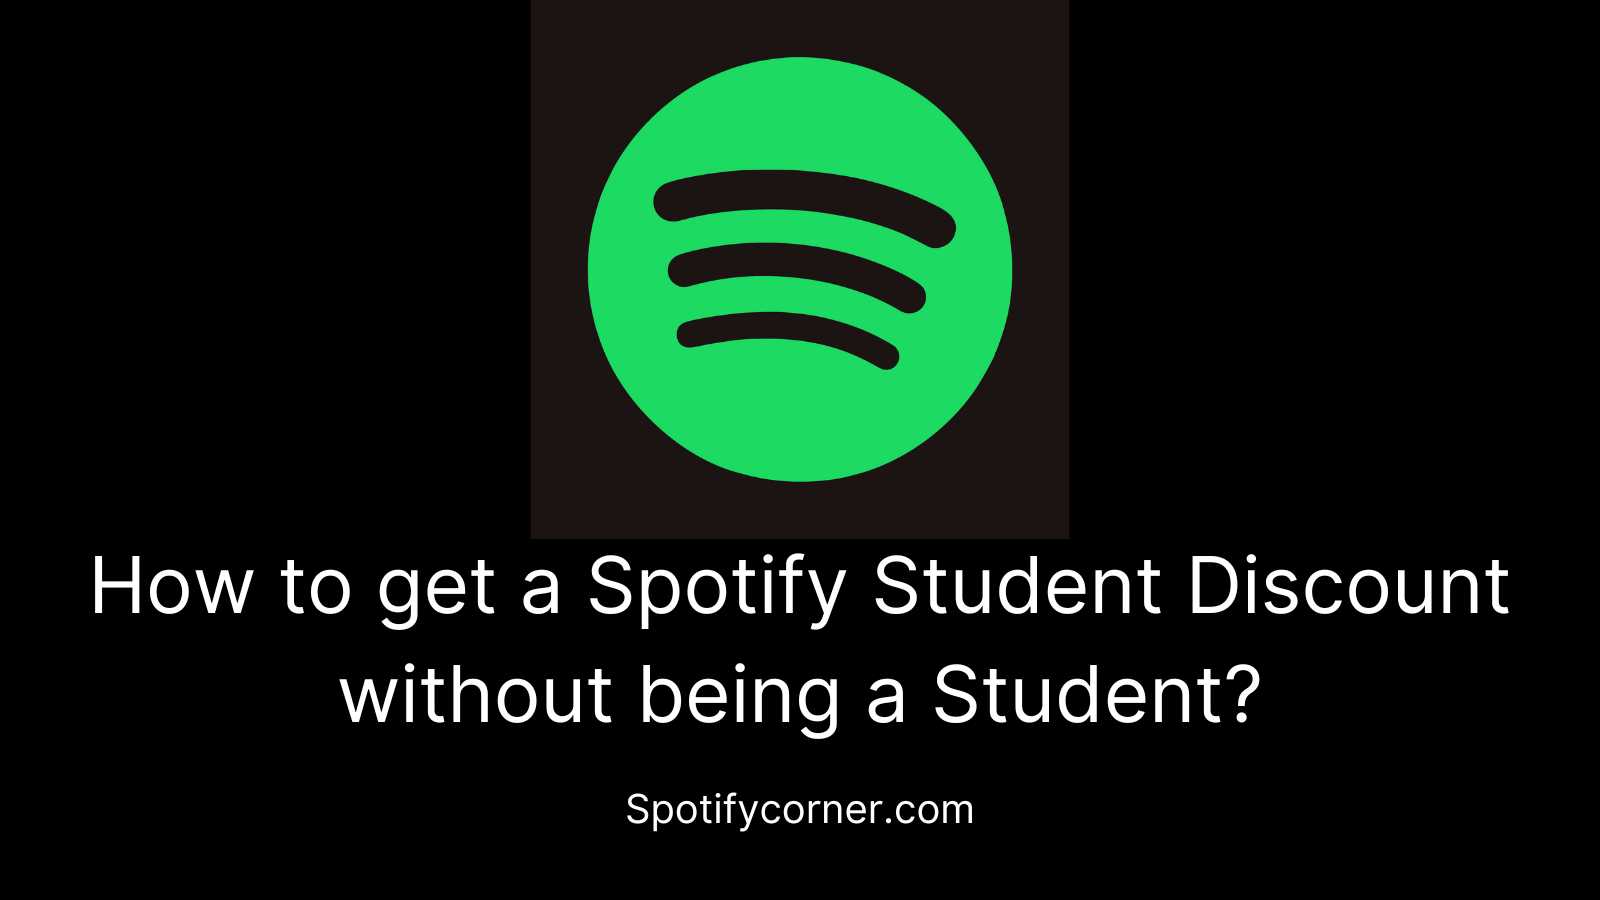 Spotify Student Discount without being a student